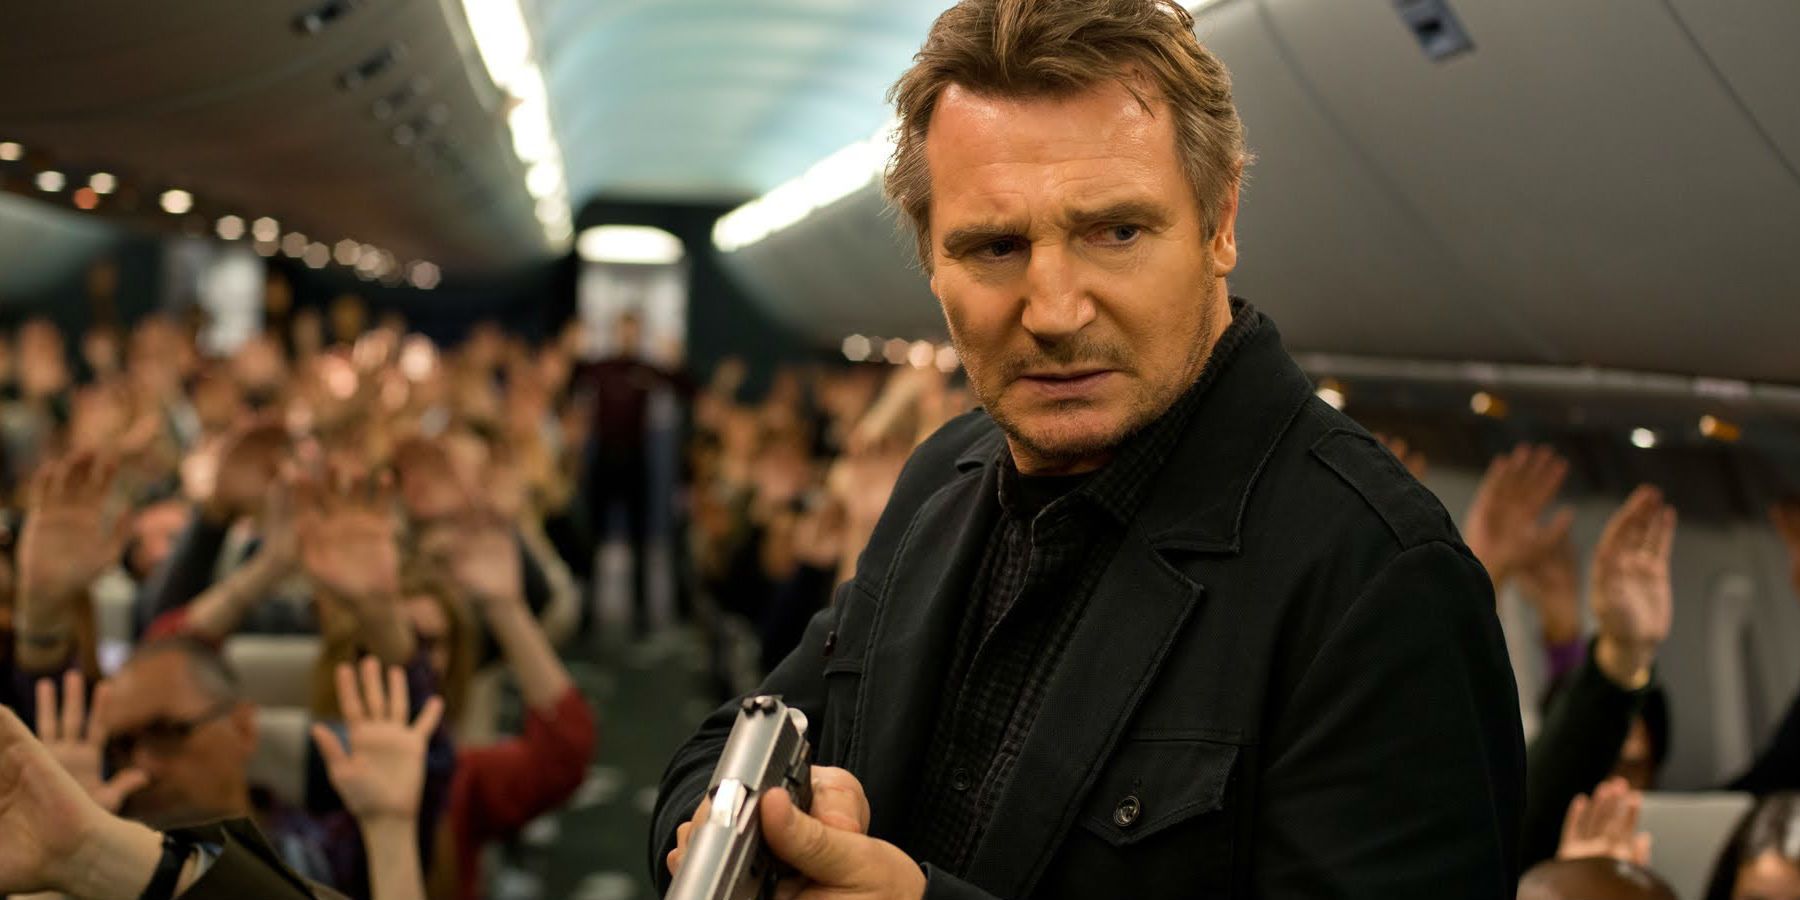 15 ActionThrillers To Watch If You Love The Taken Movies